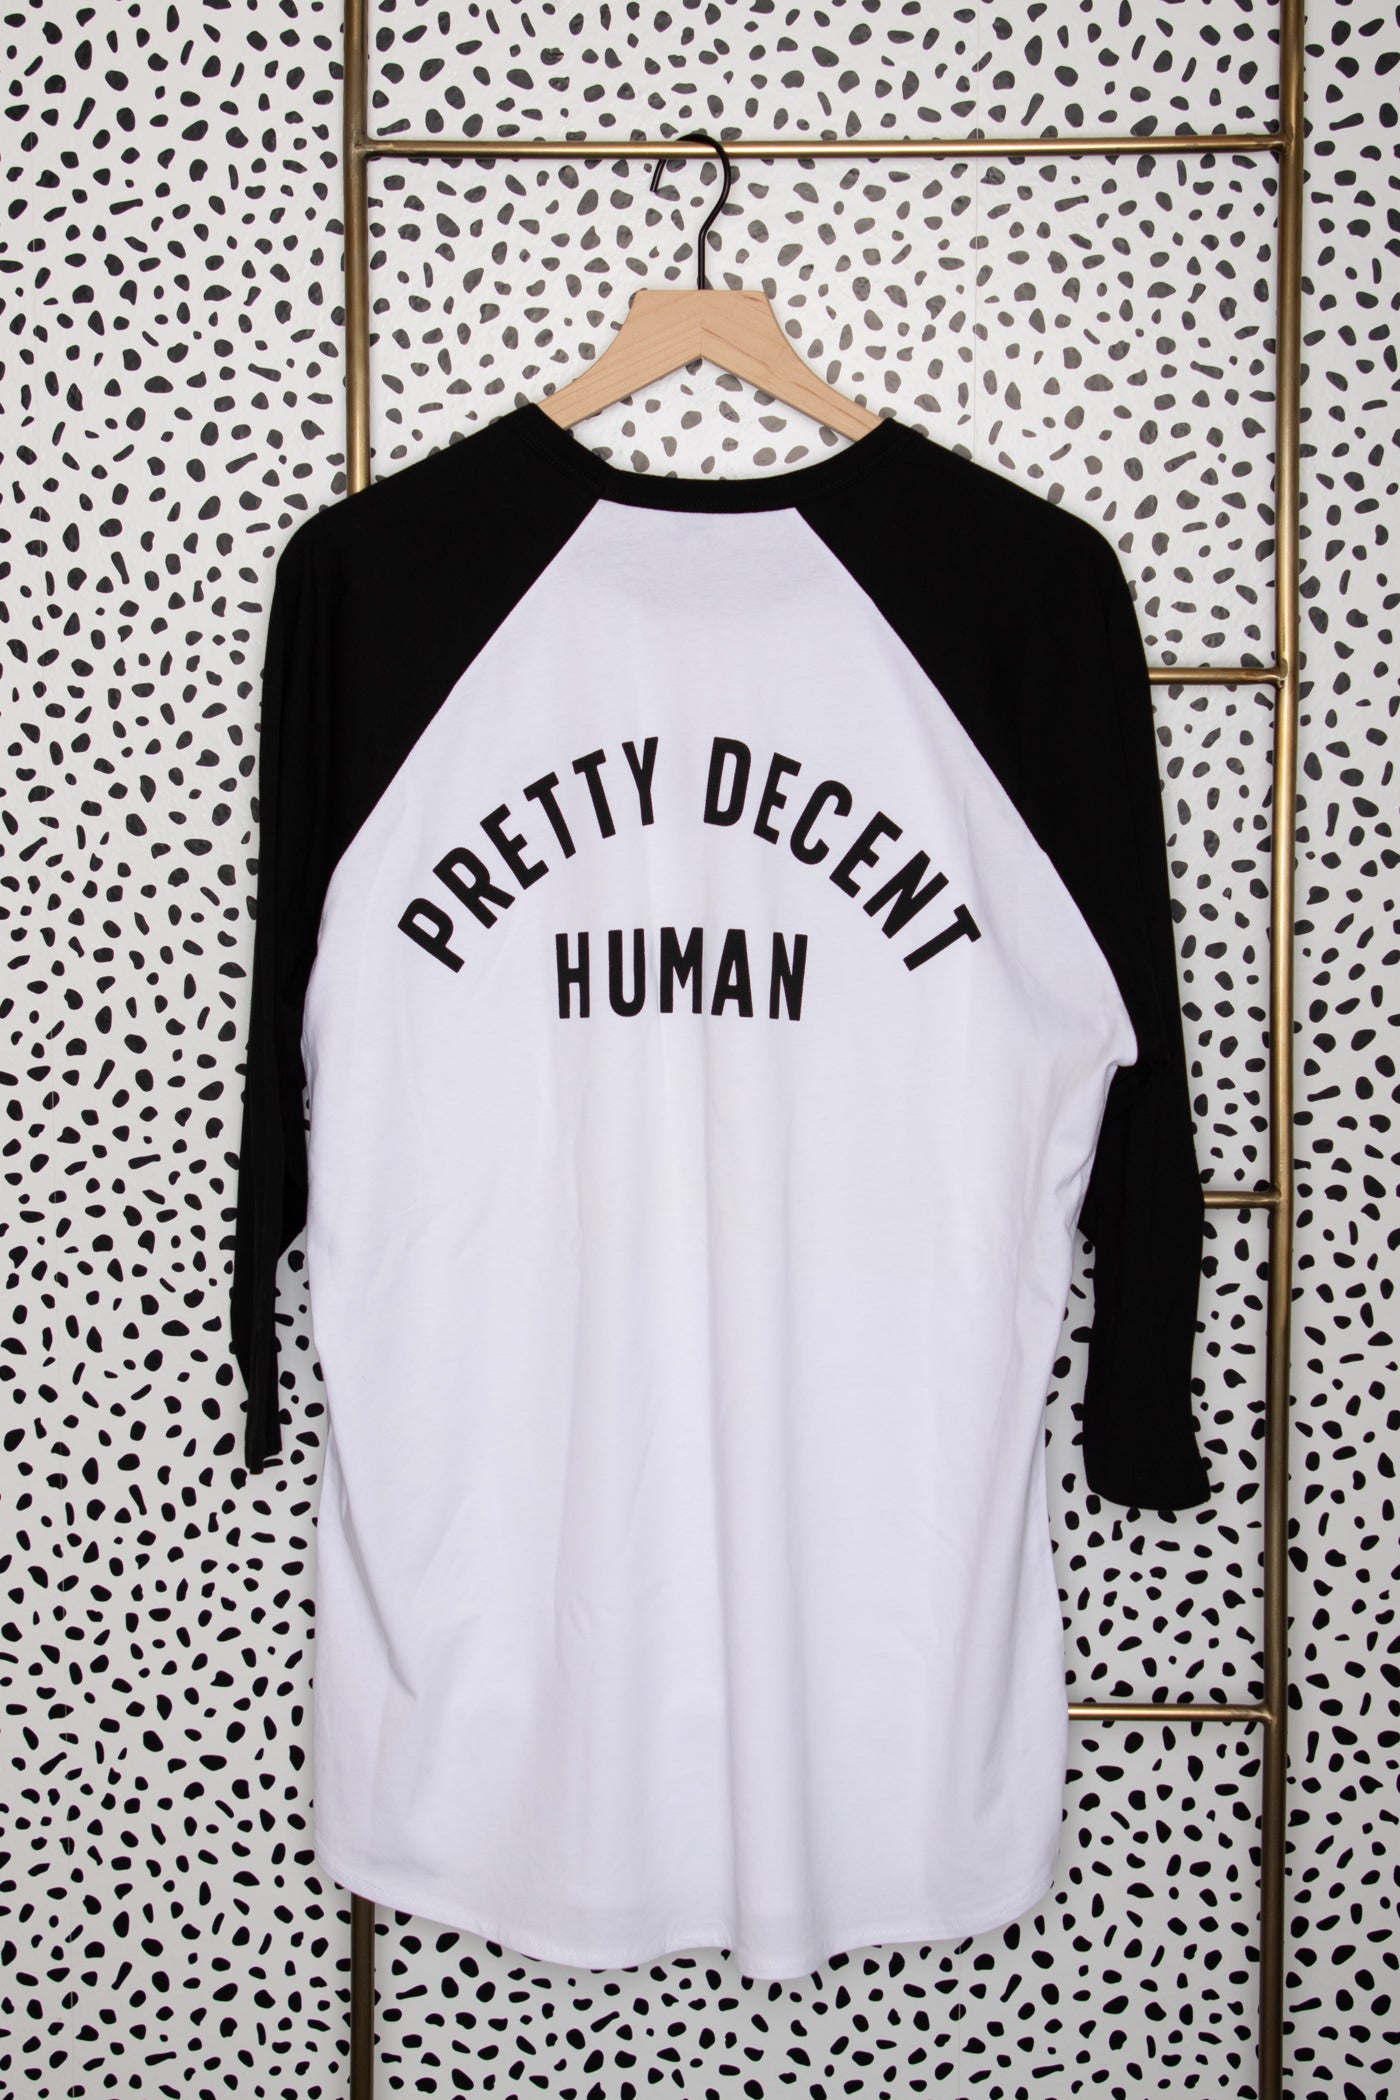 PRE-ORDER Pretty Decent Human- The Glow Up